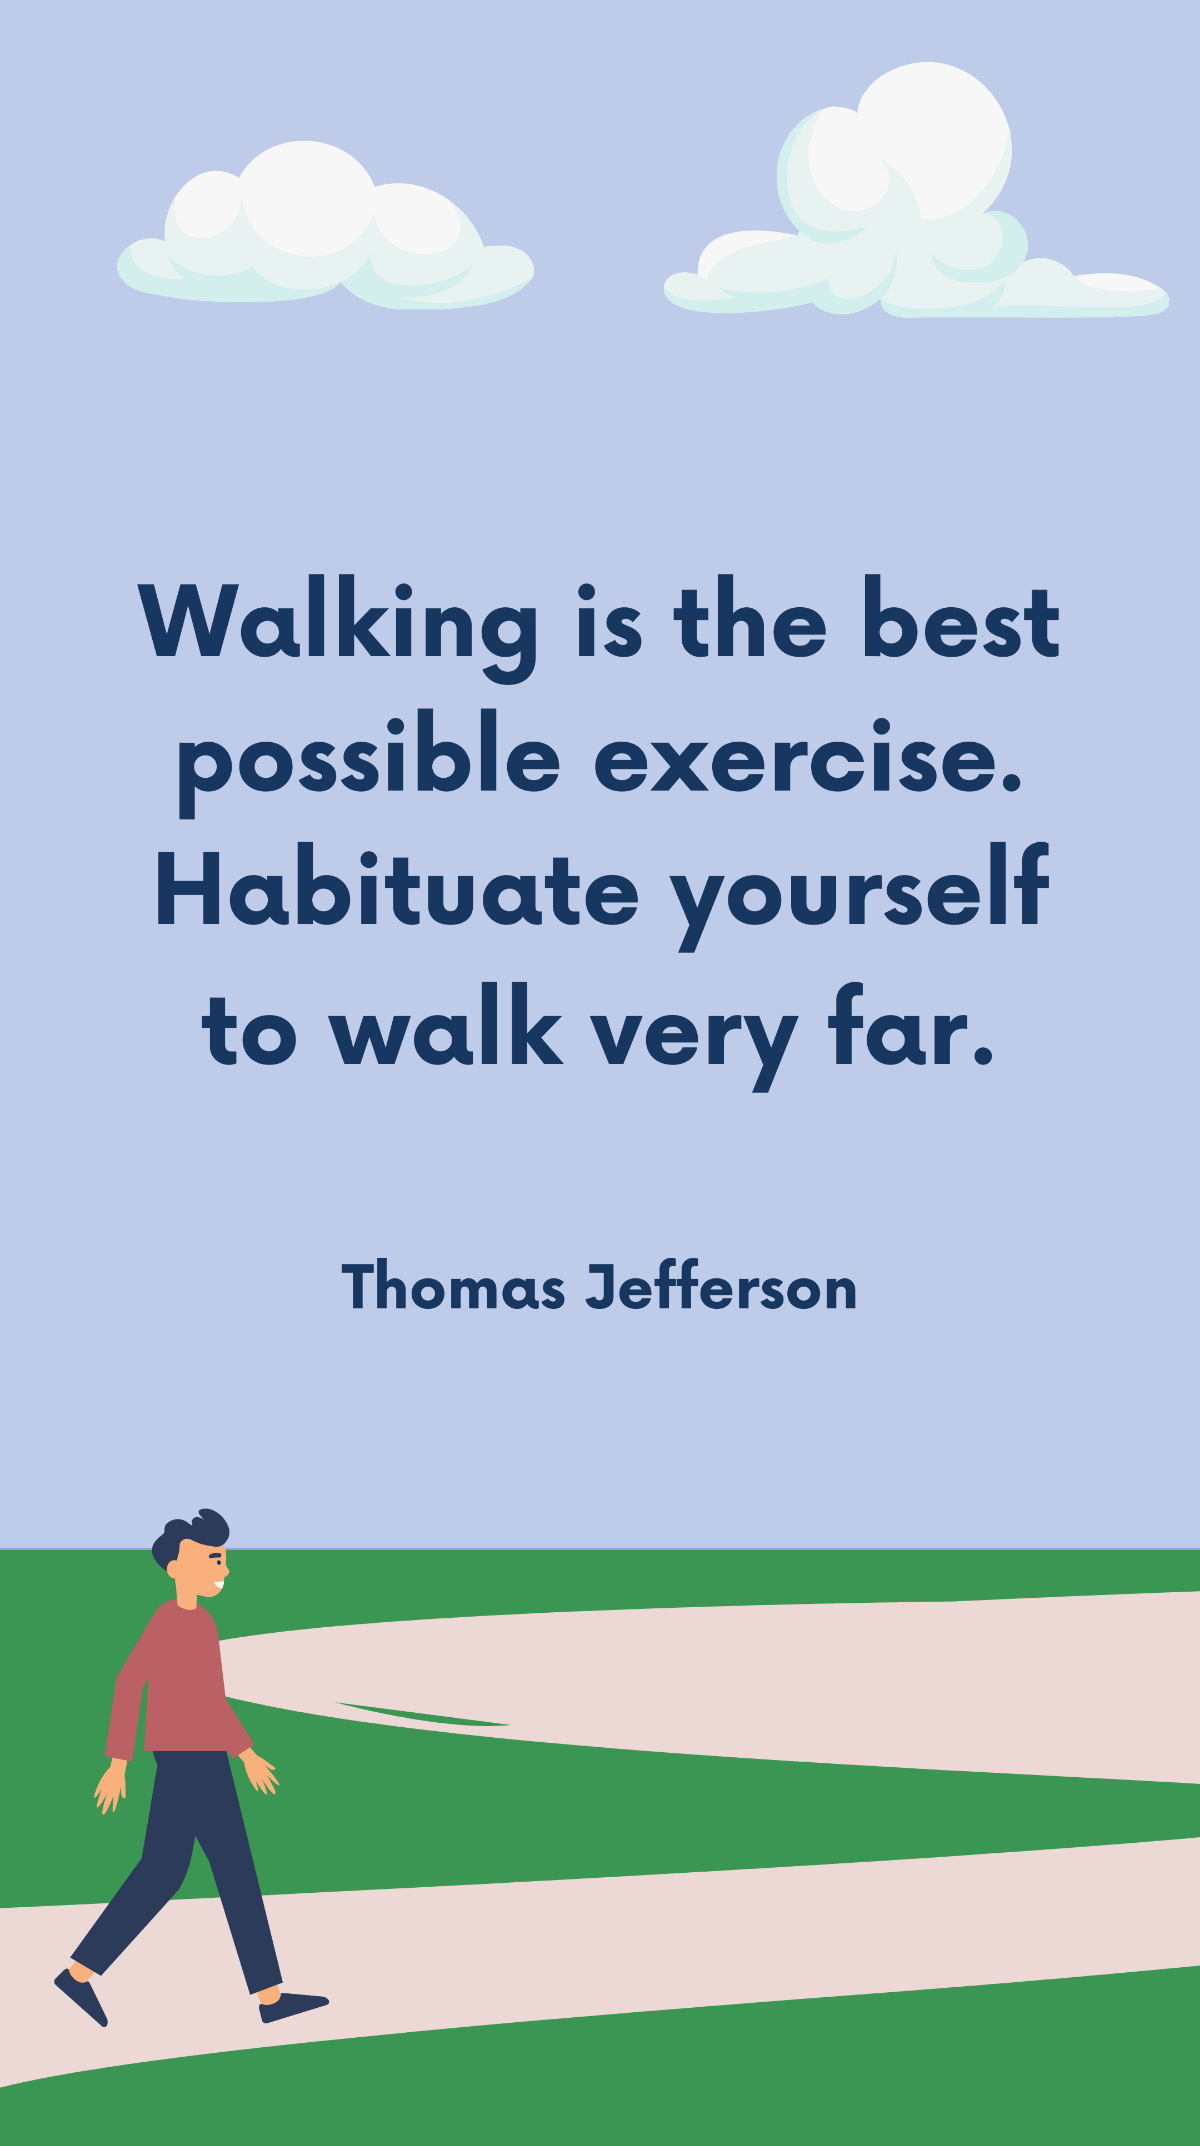 Thomas Jefferson - Walking is the best possible exercise. Habituate yourself to walk very far.